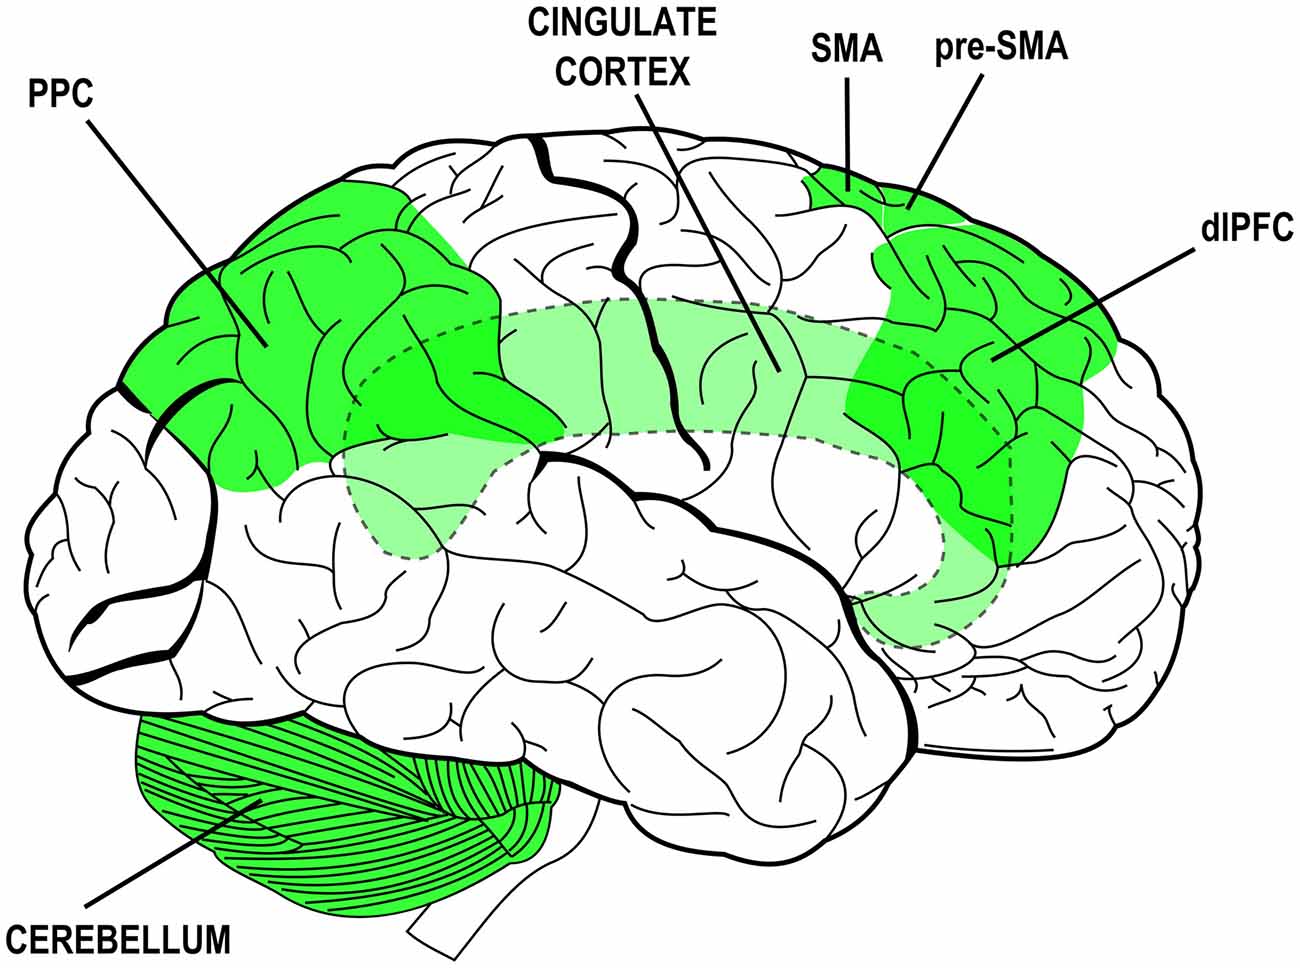 Brain structure. Brain scheme. TDCS cerebellum. Brain structure and functional Connectivity associated with.